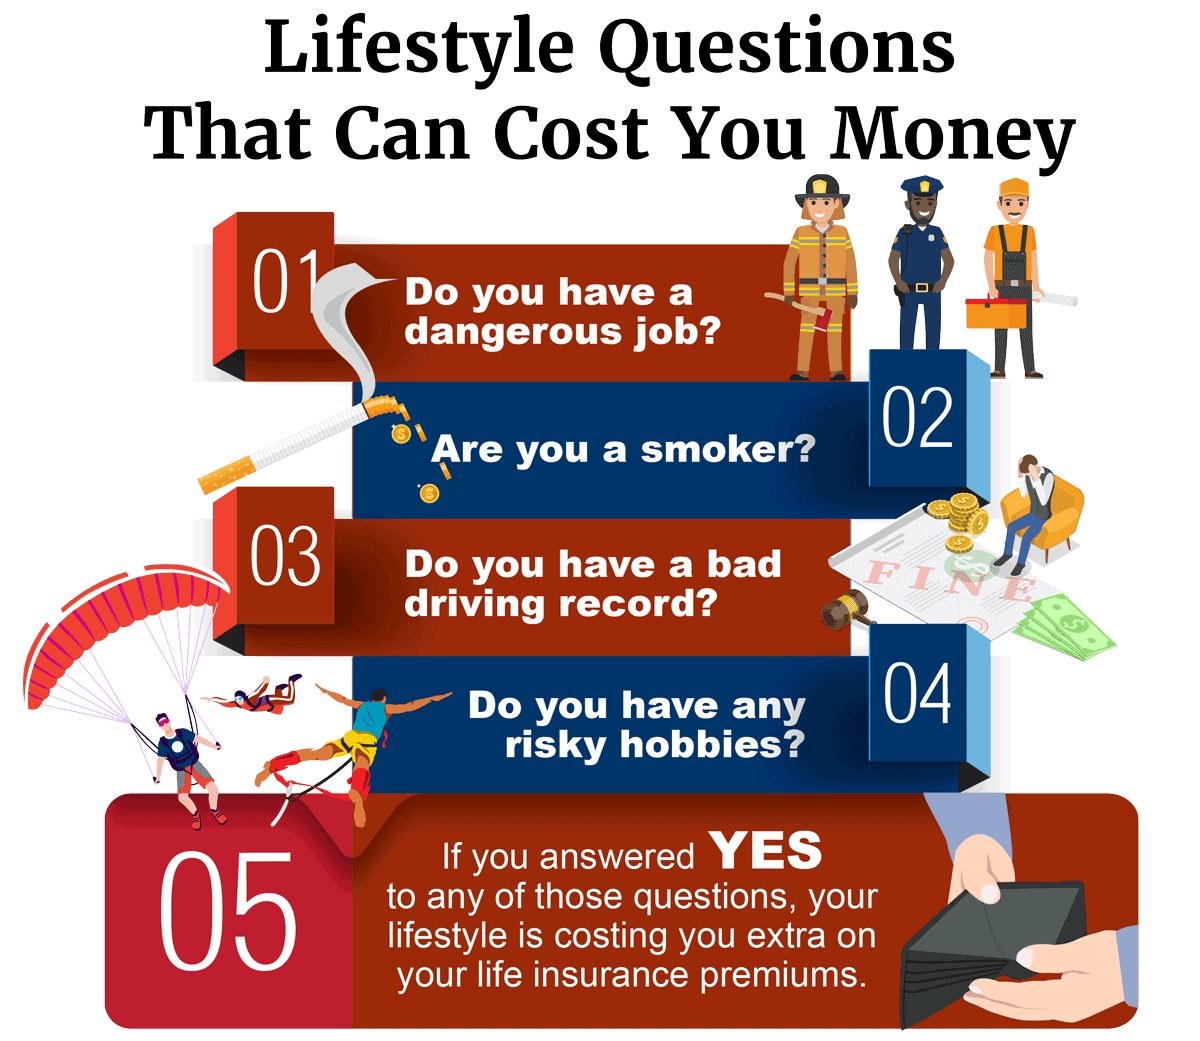 Lifestyle Questions That Can Cost You Money